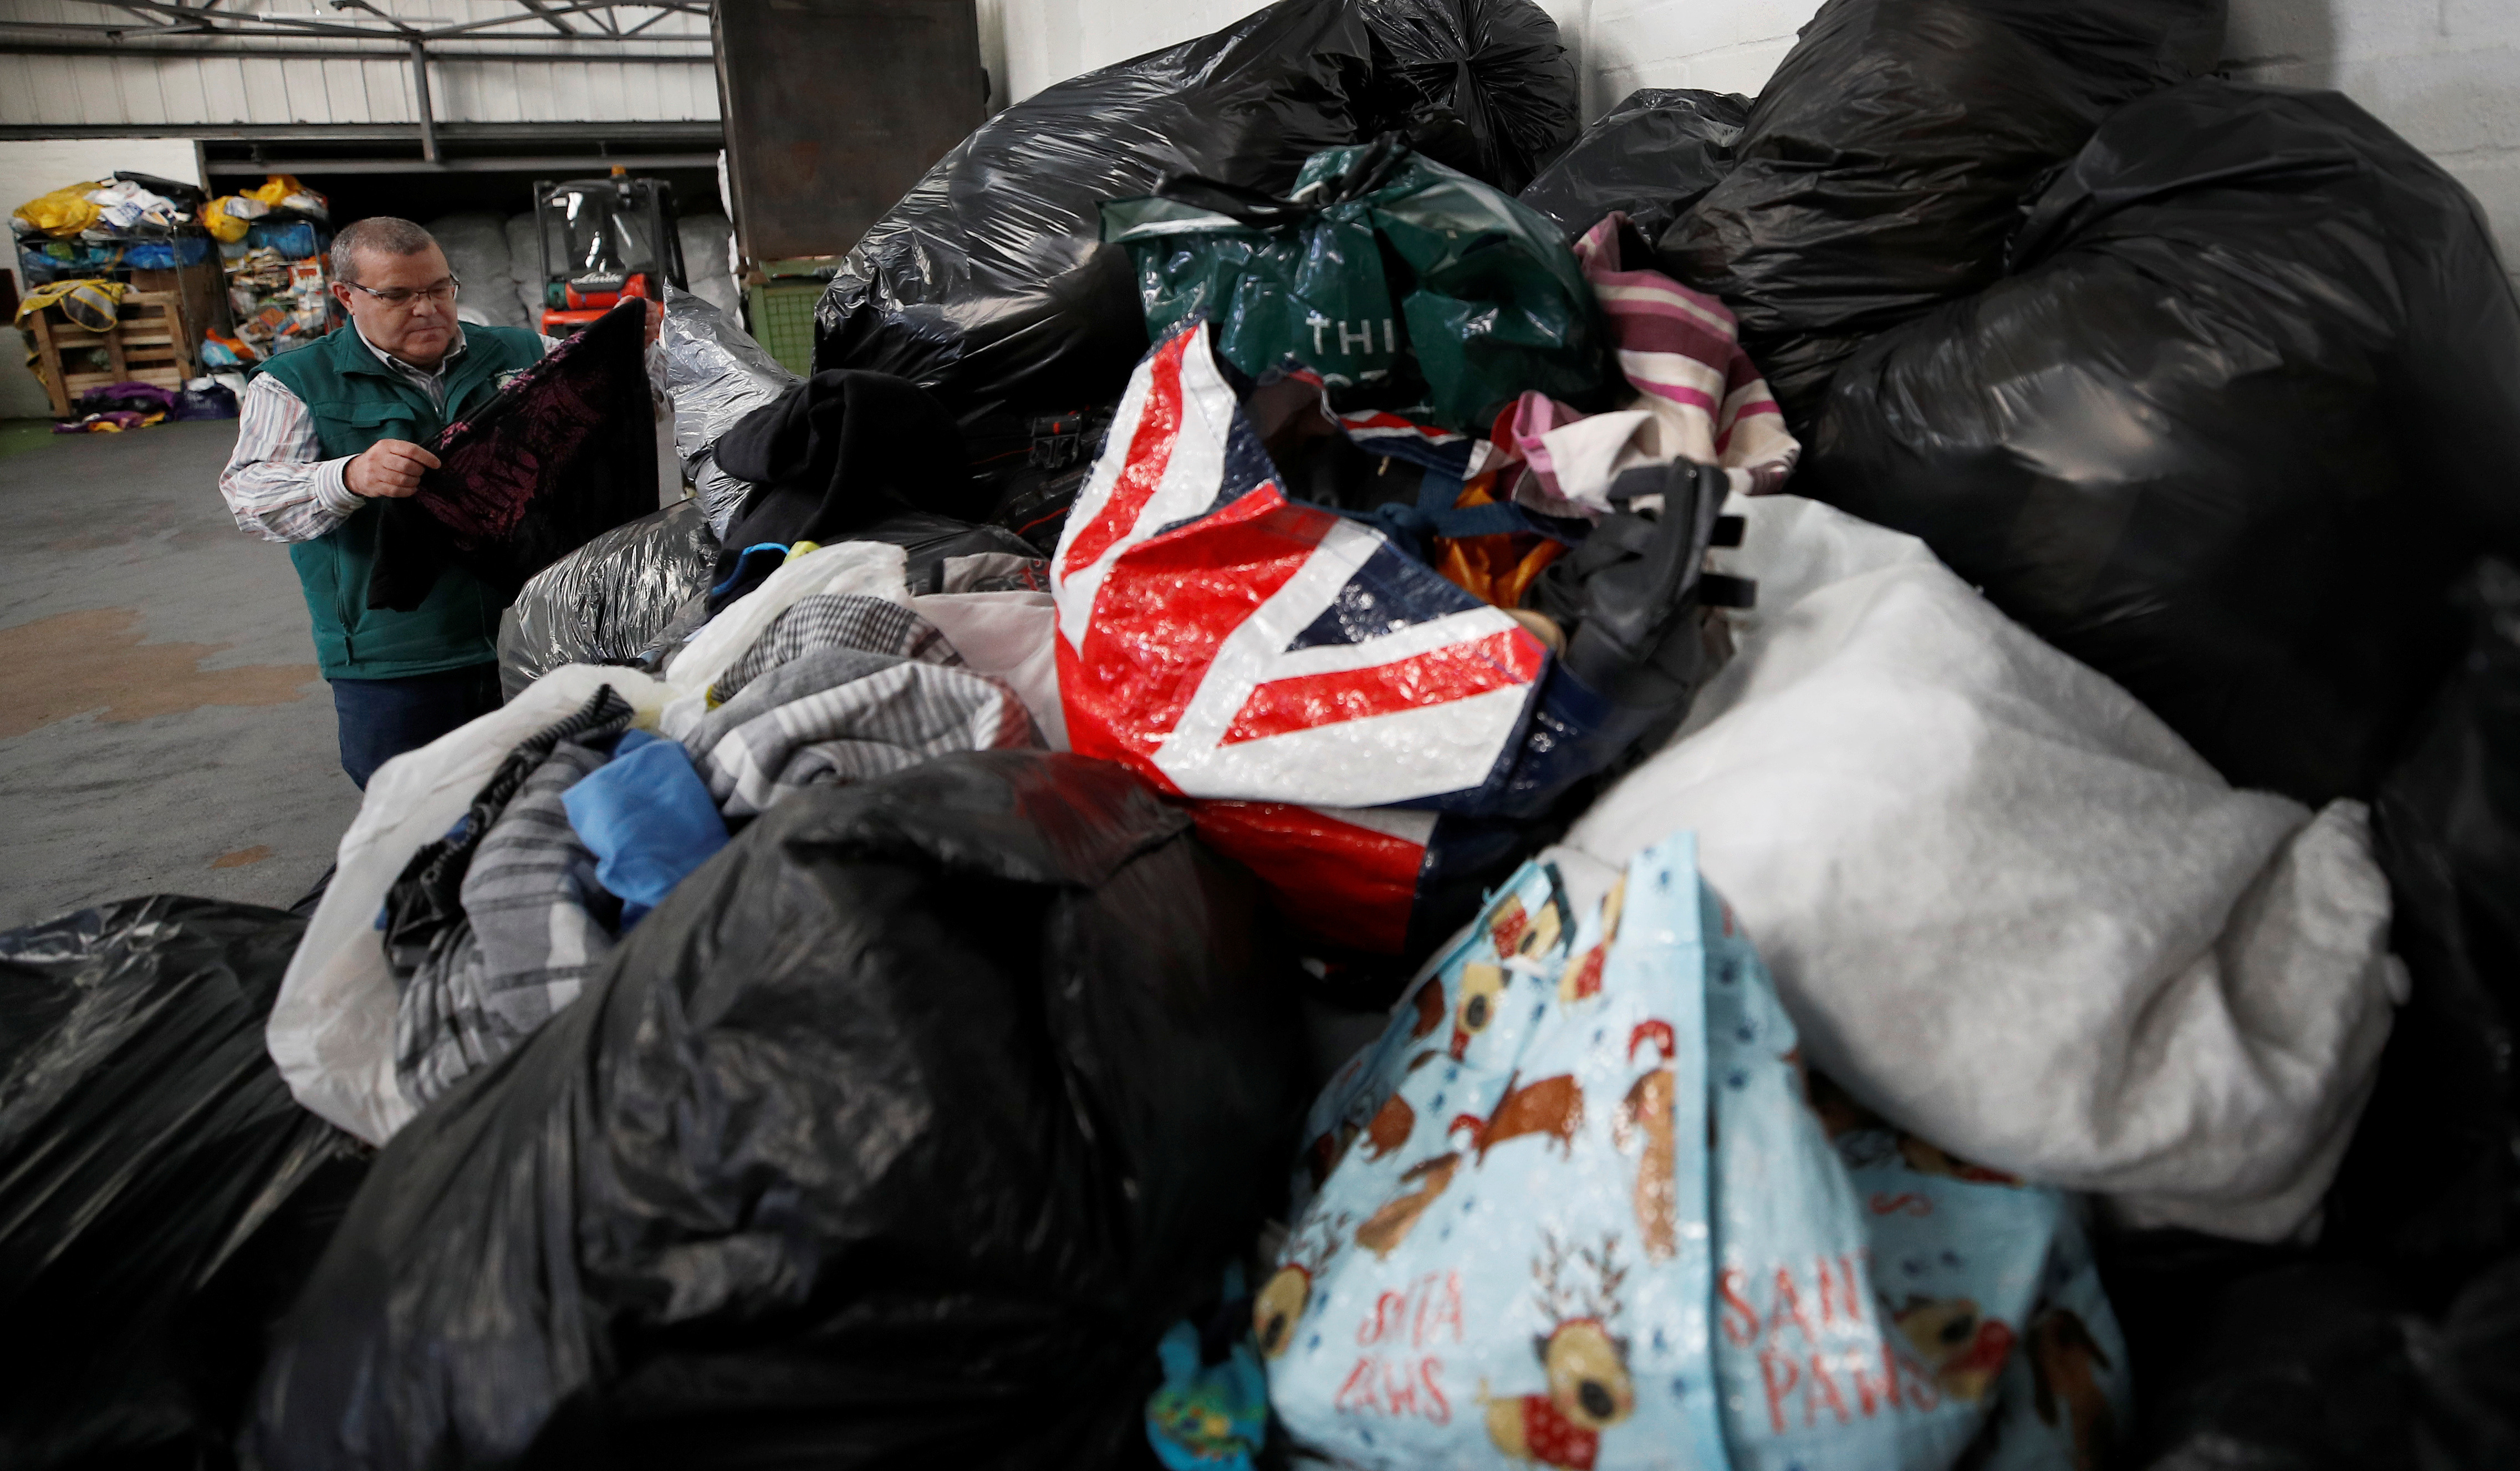 Bags of clothing are manually sorted through at a recycling facility in
Stourbridge, Britain.